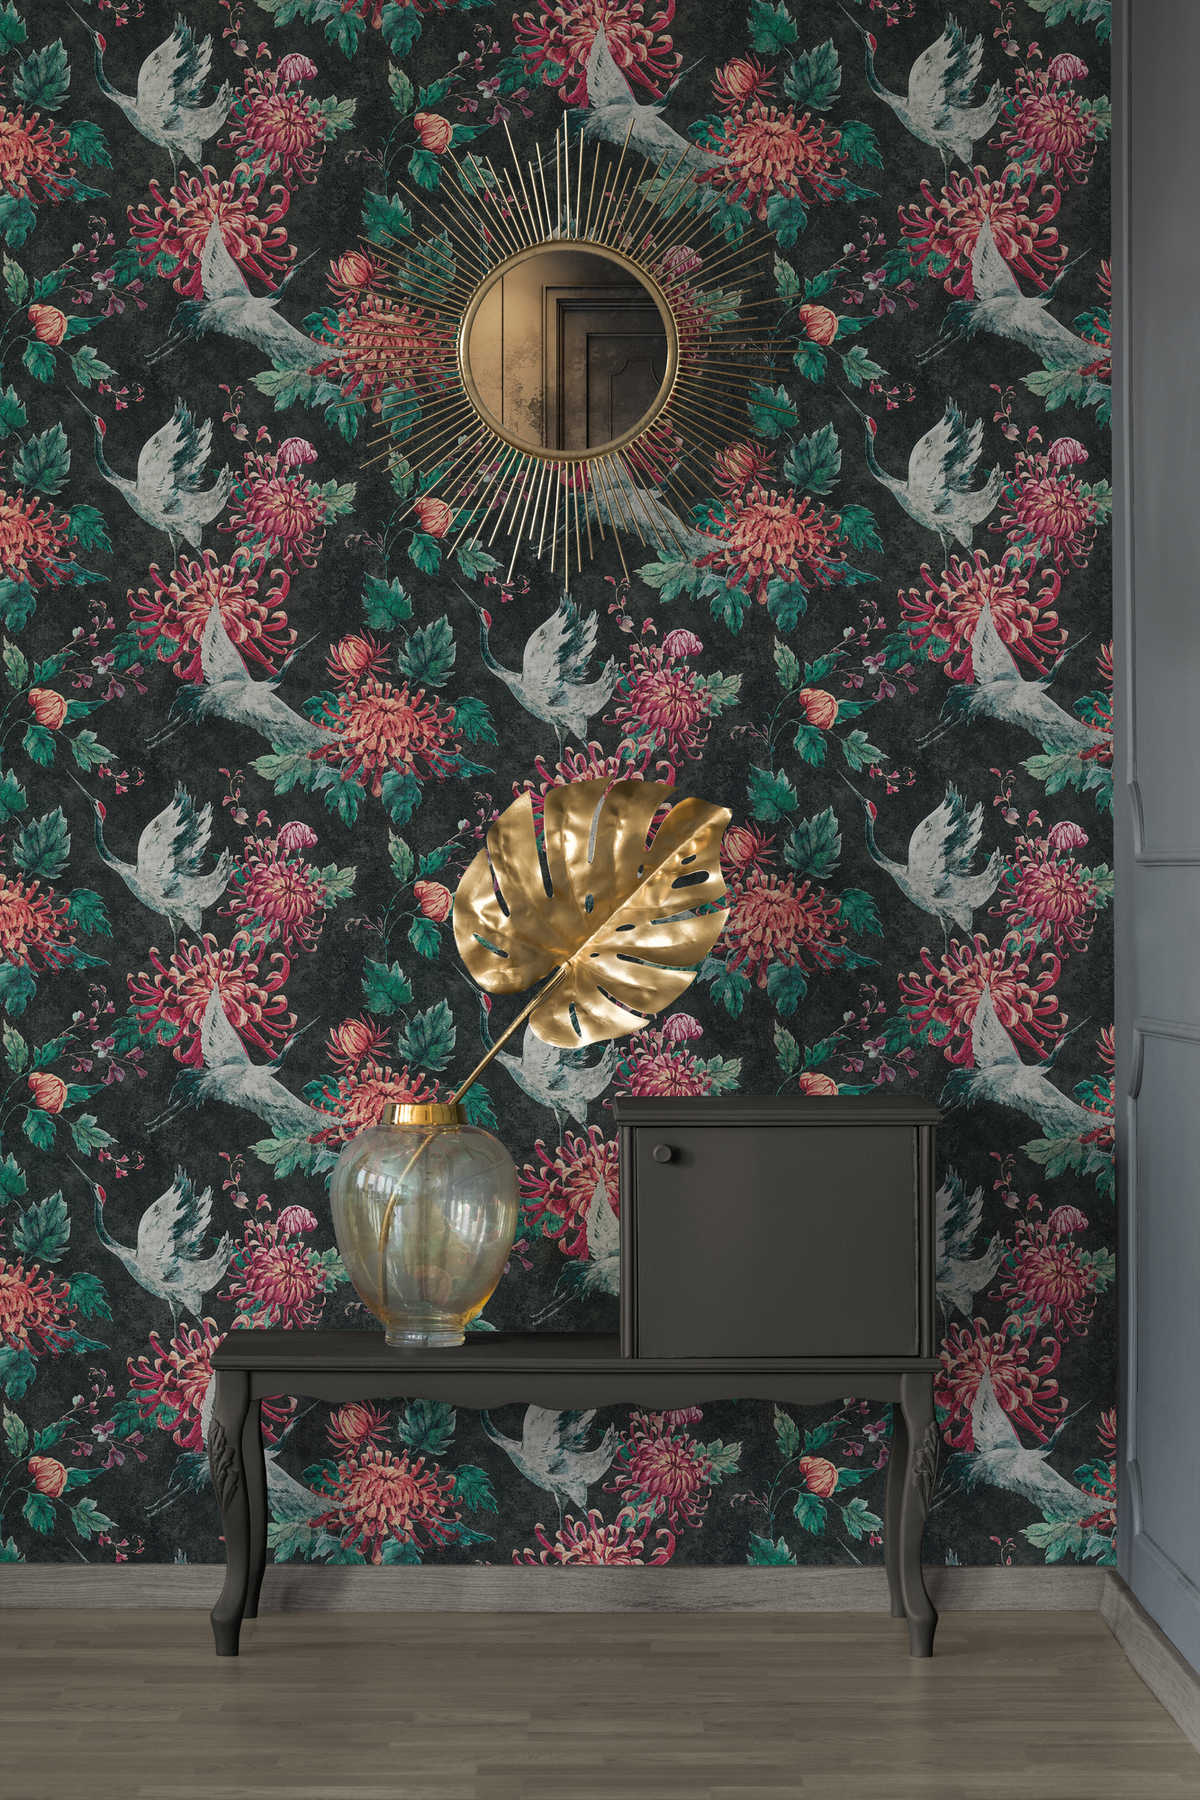             Pattern wallpaper with Asian crane and flower motif - black, red, green
        